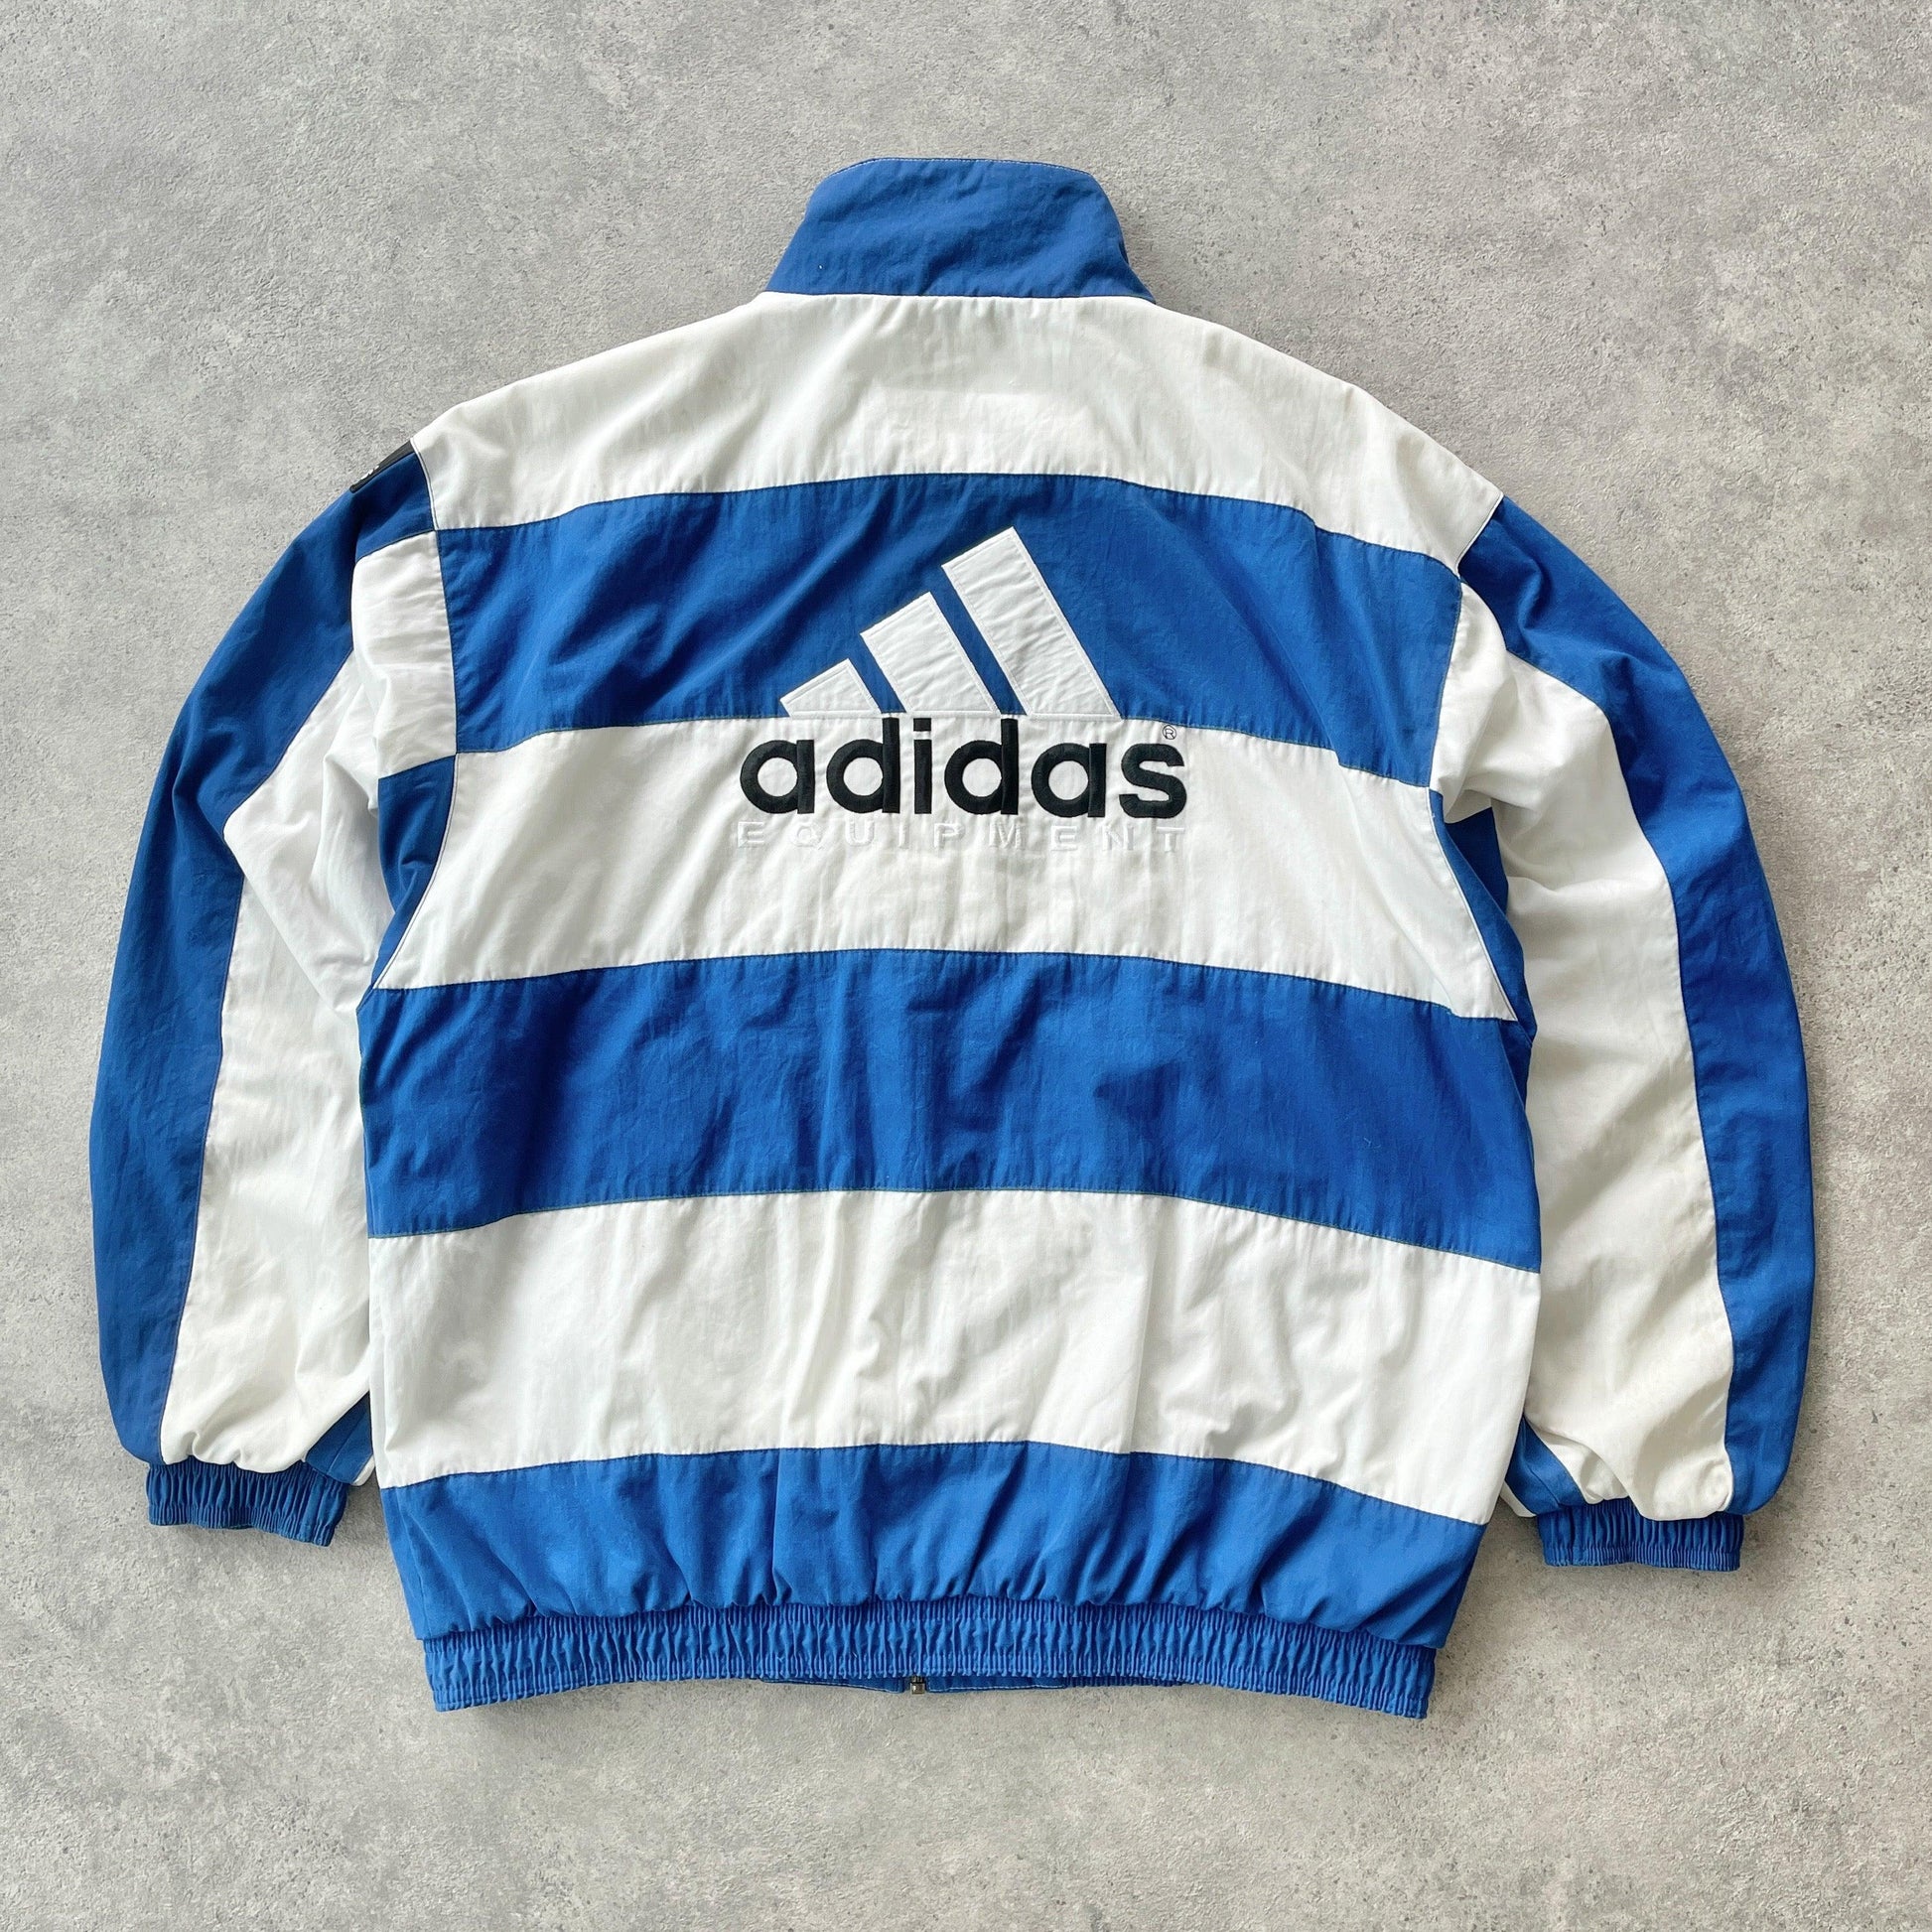 Adidas Equipment 1990s lightweight embroidered track jacket (L) - Known Source